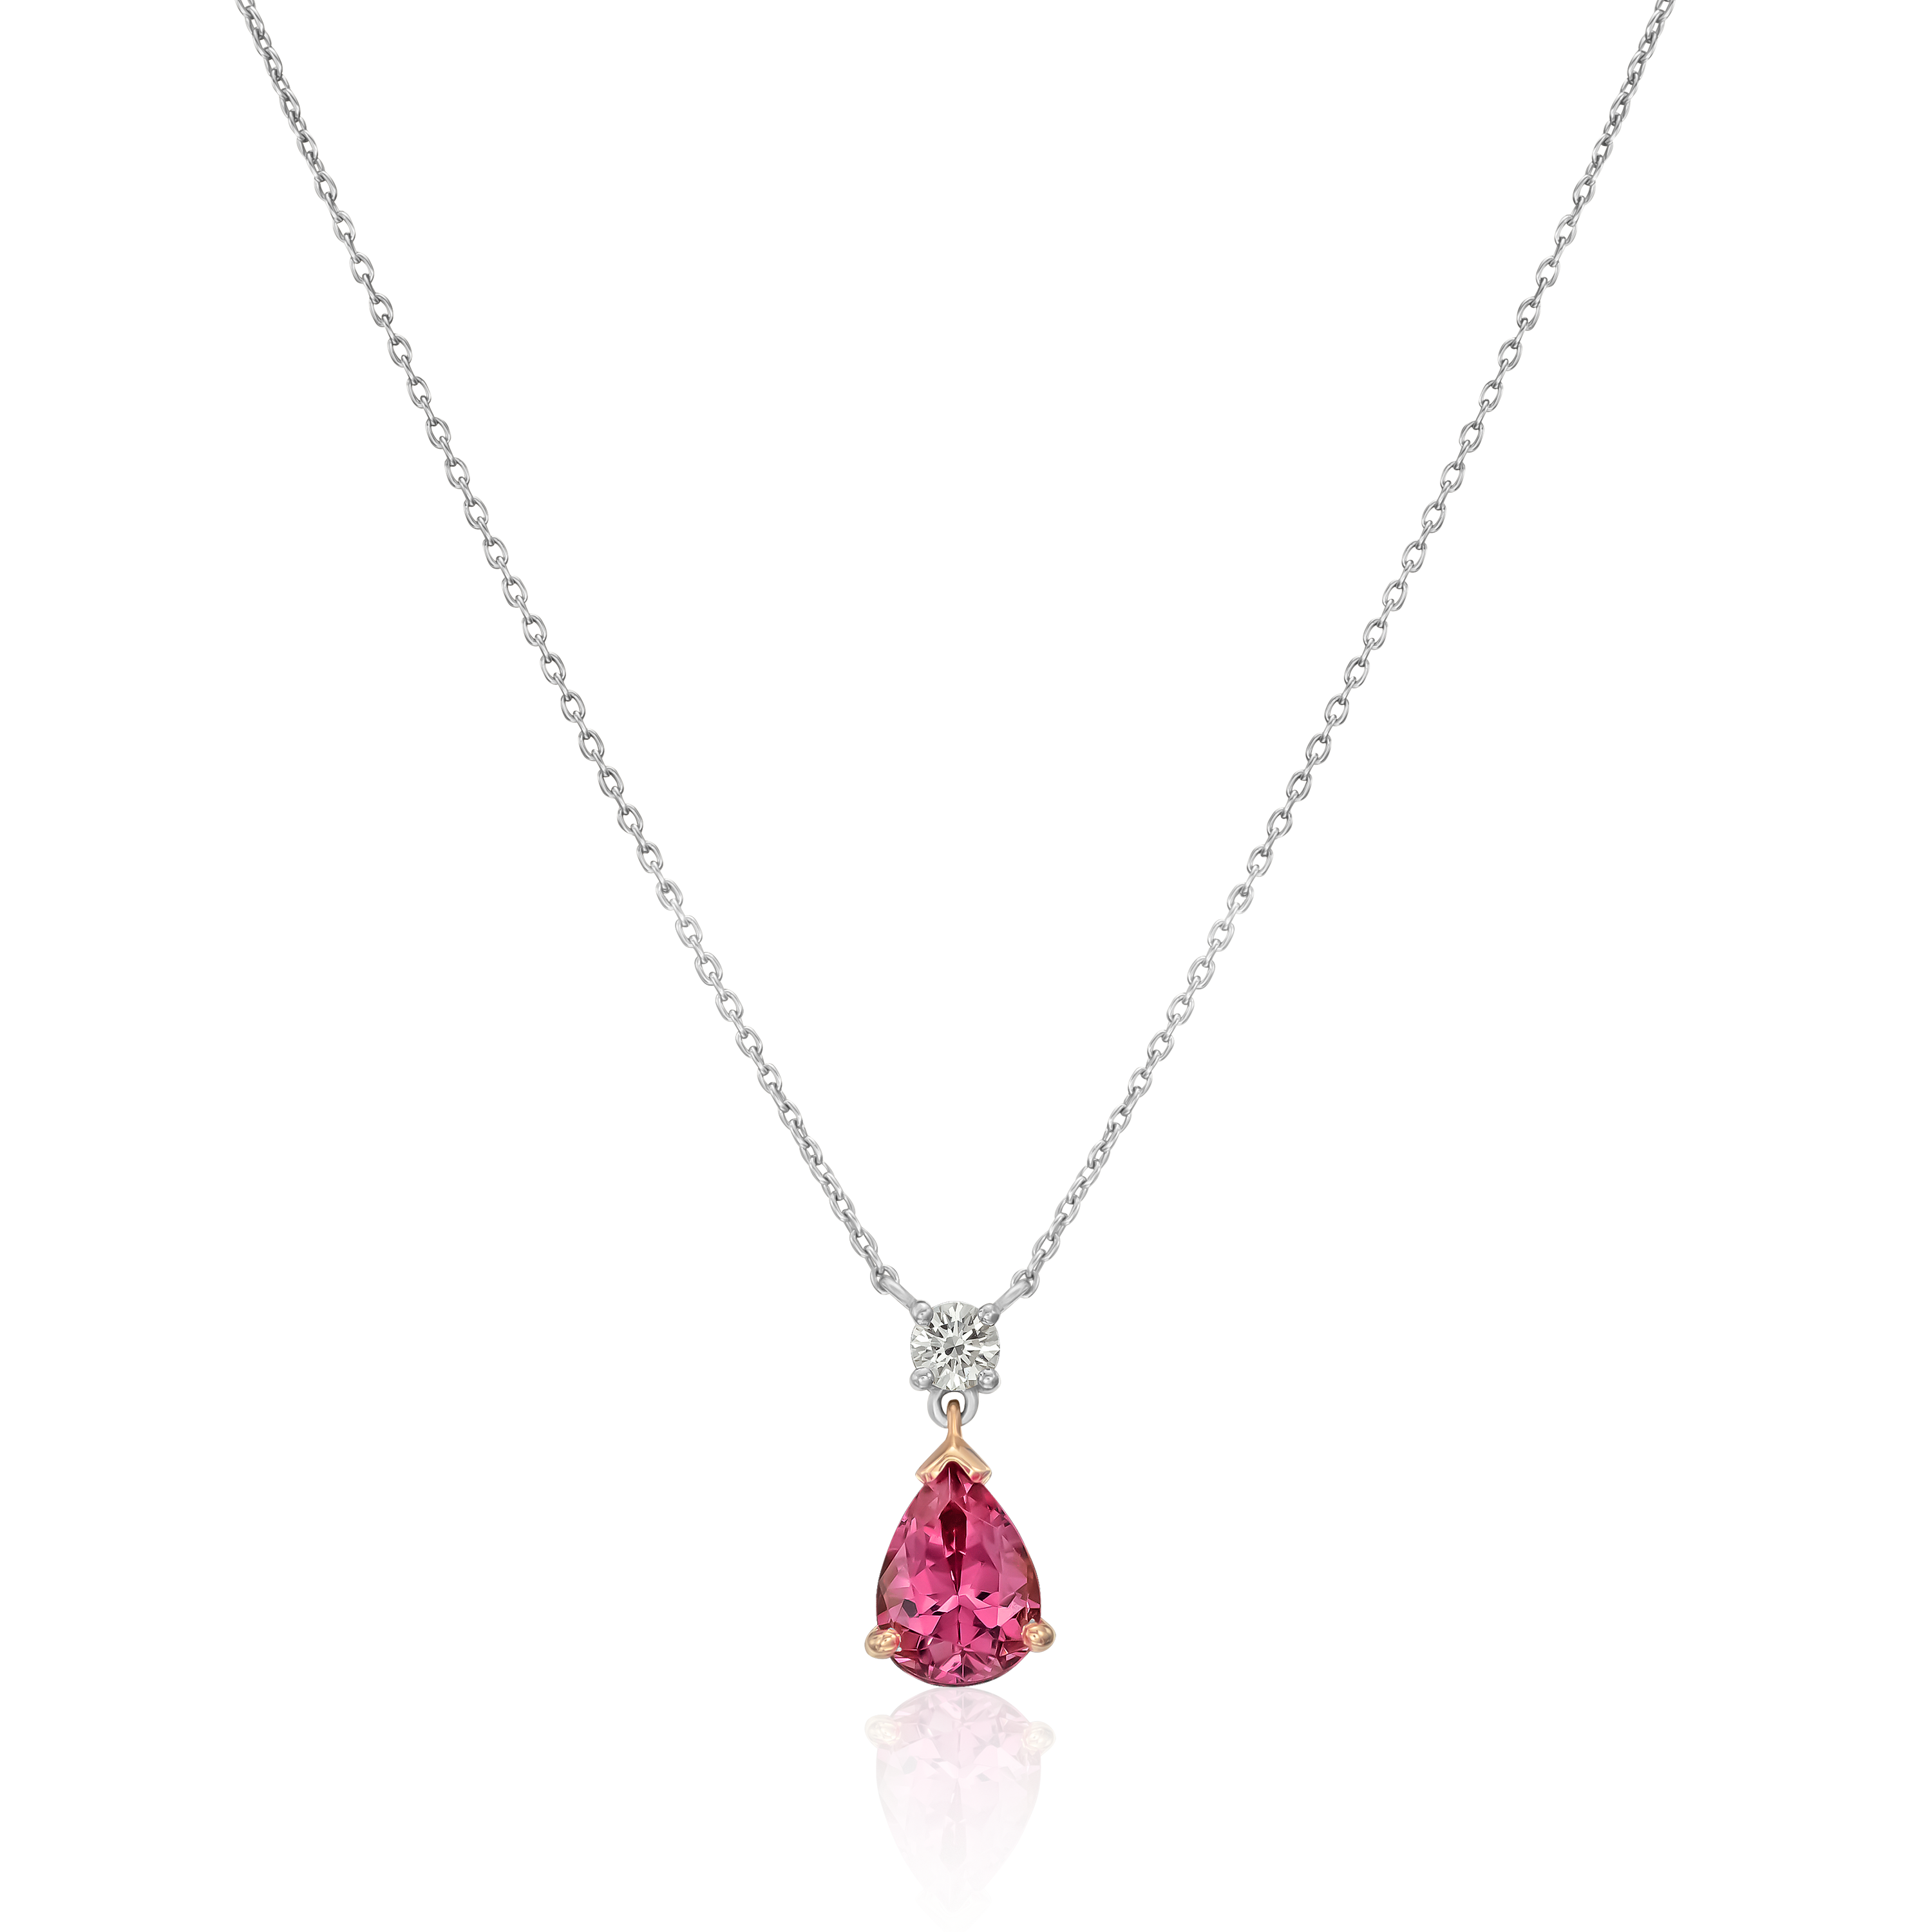 1.14cts Pink Spinel and Diamond Pendant